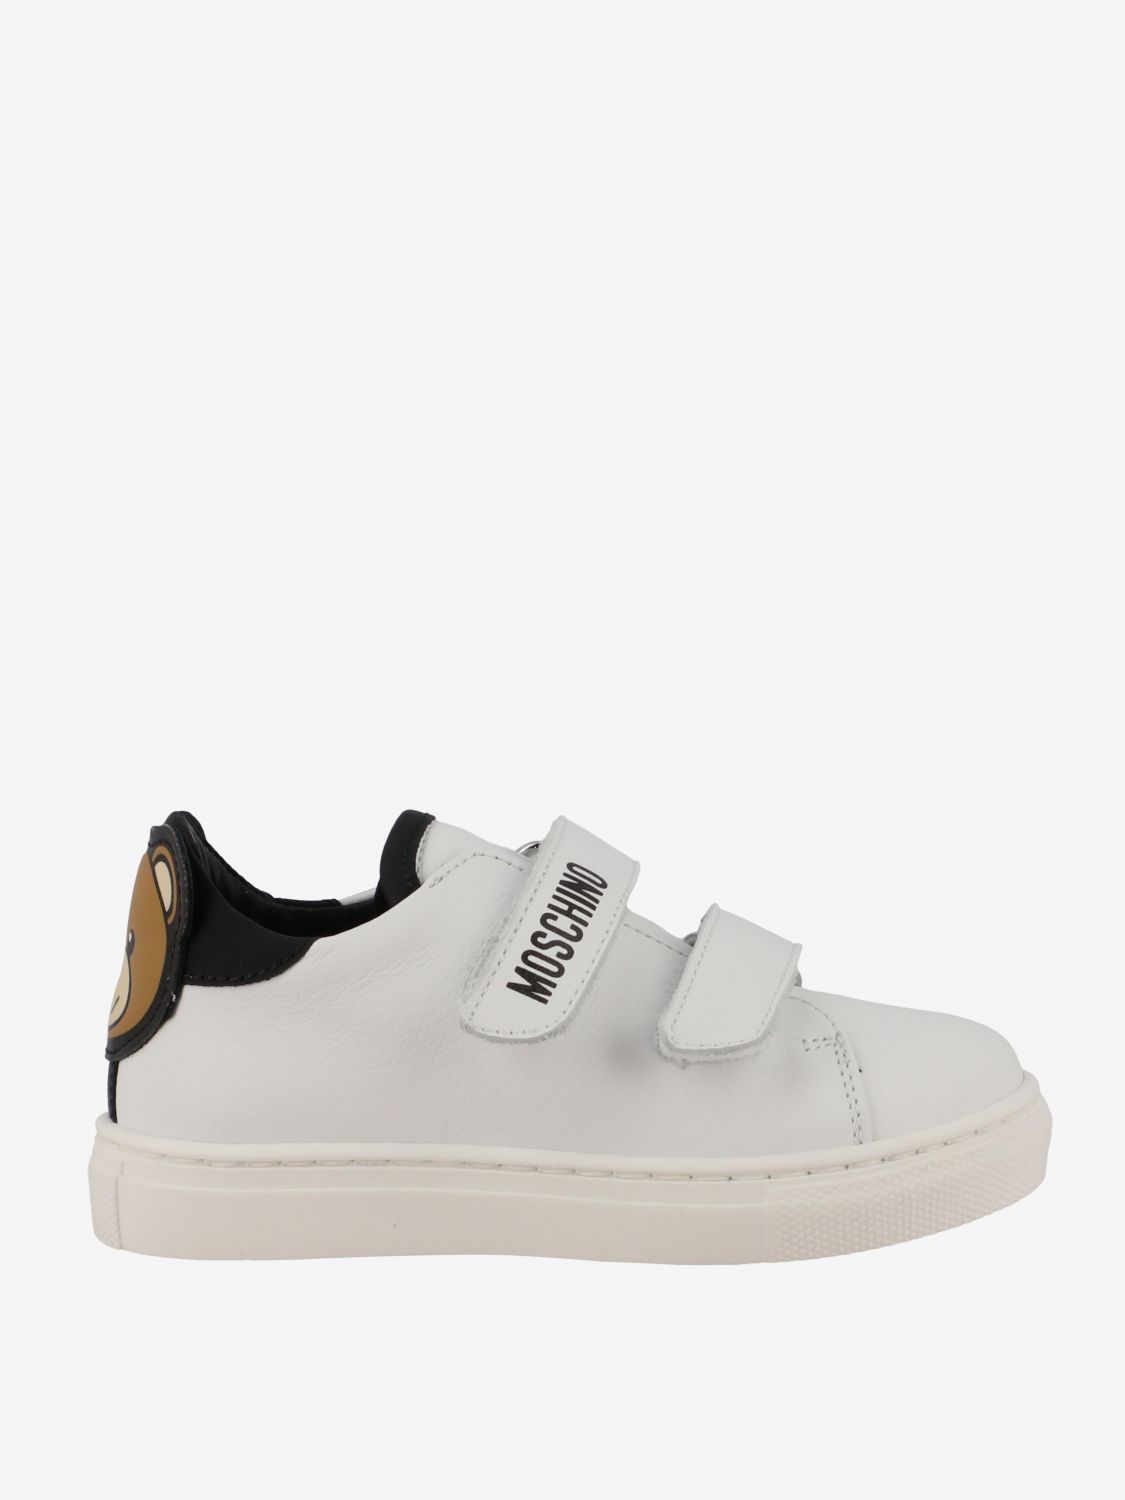 Moschino Baby Outlet: Shoes kids | Shoes Moschino Baby Kids White ...